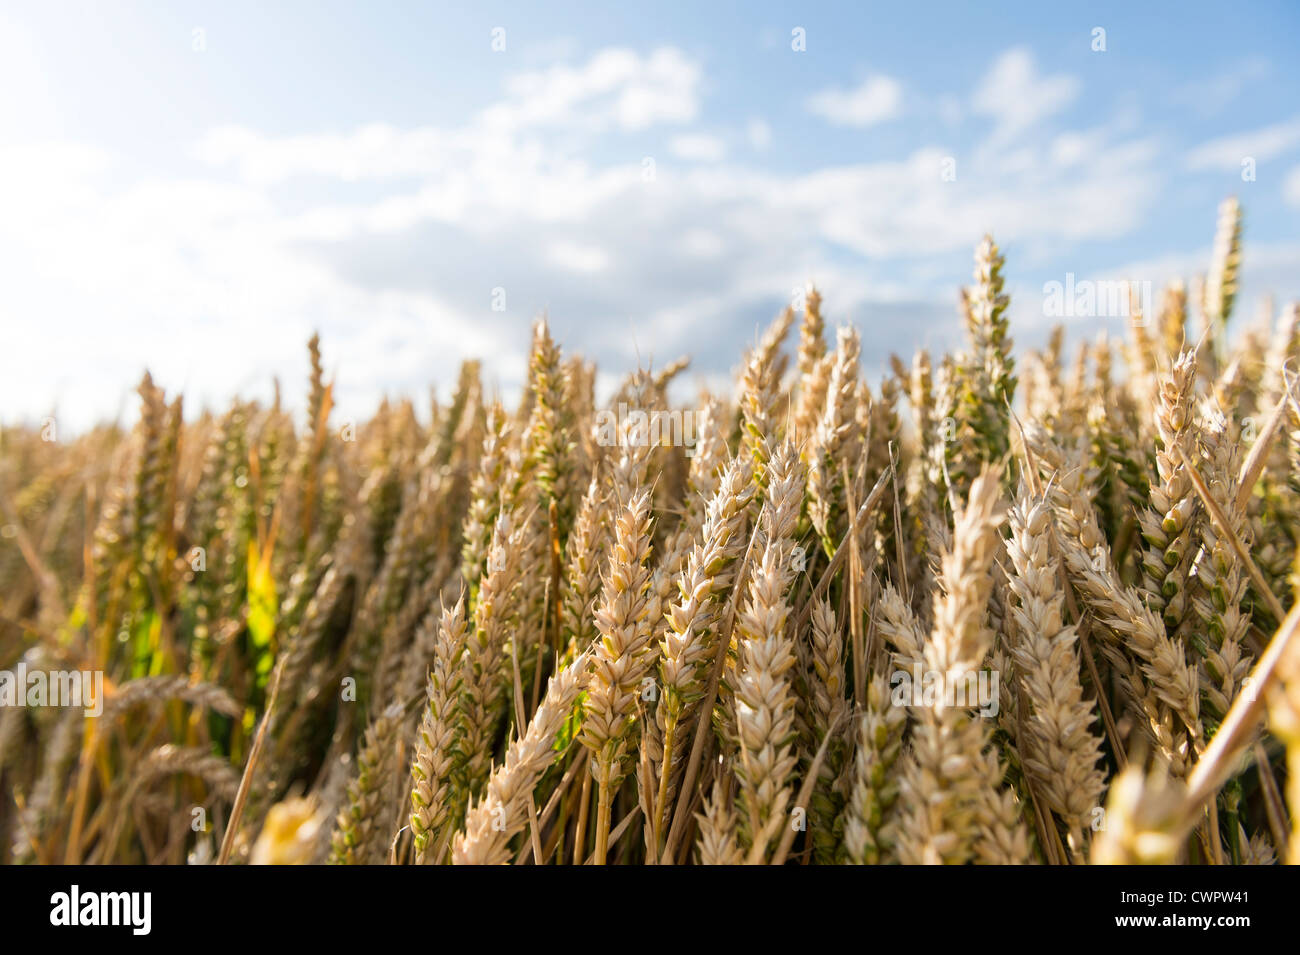 Ripening Wheat Crop with Blue Cloudy Sky Stock Photo